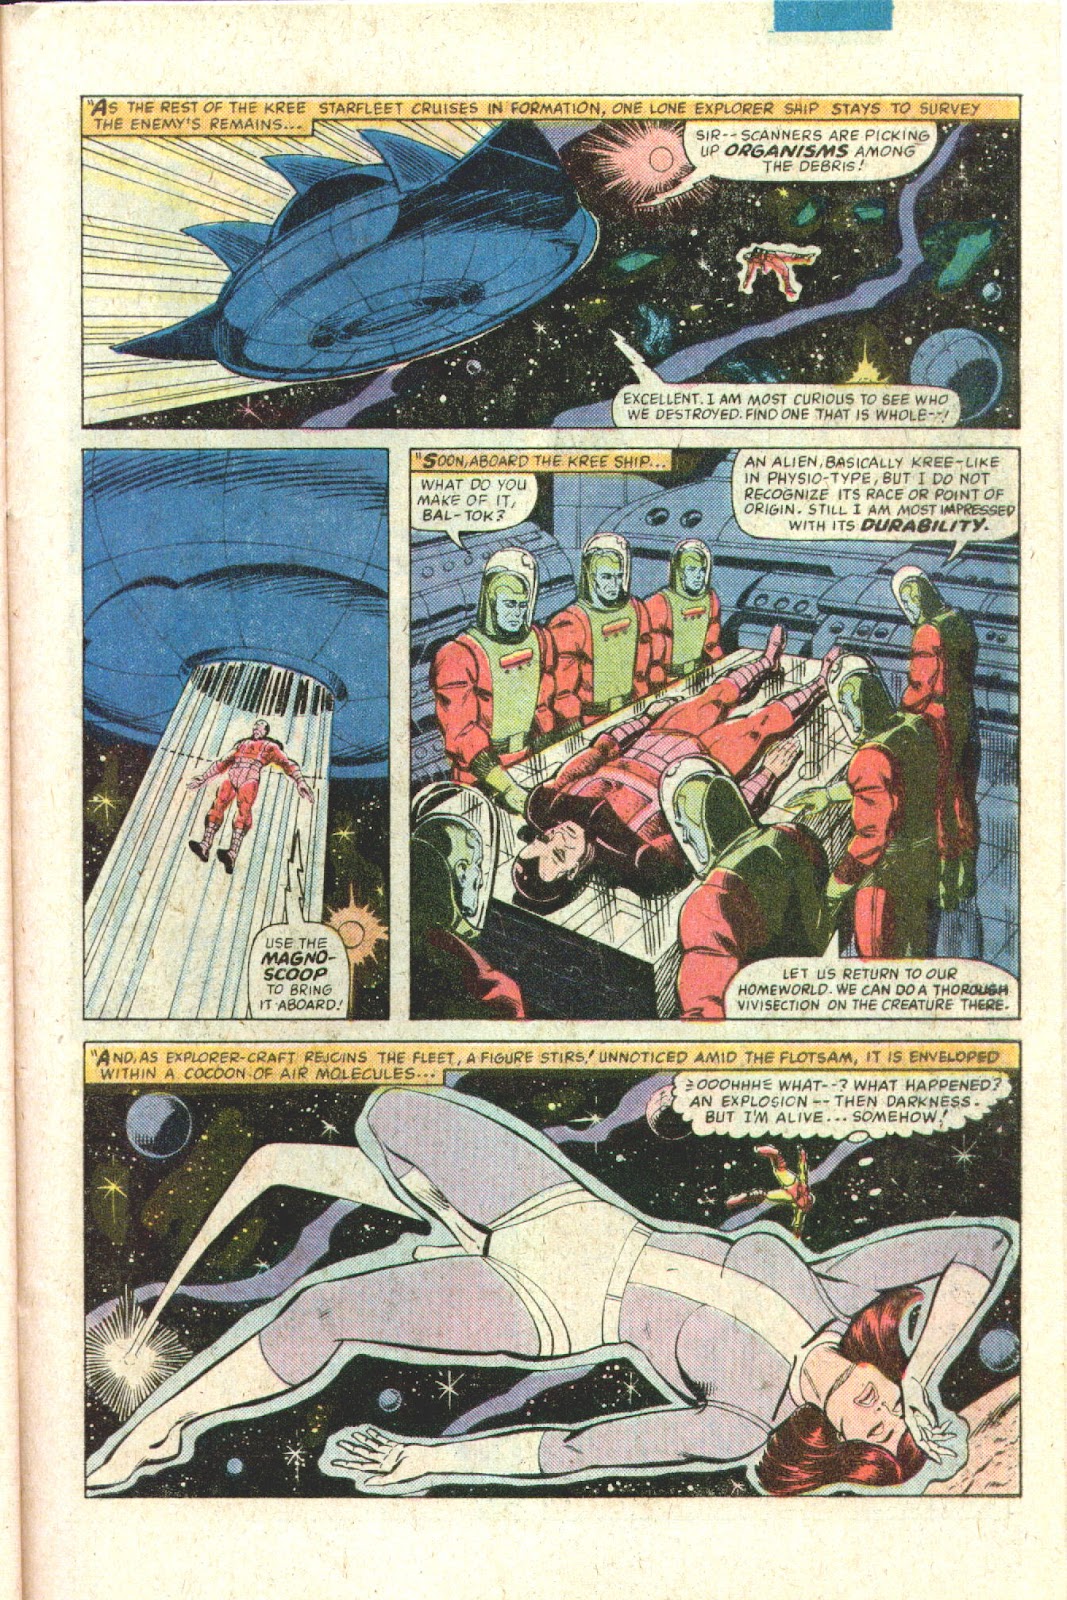 What If? (1977) issue 28 - Daredevil became an agent of SHIELD - Page 42